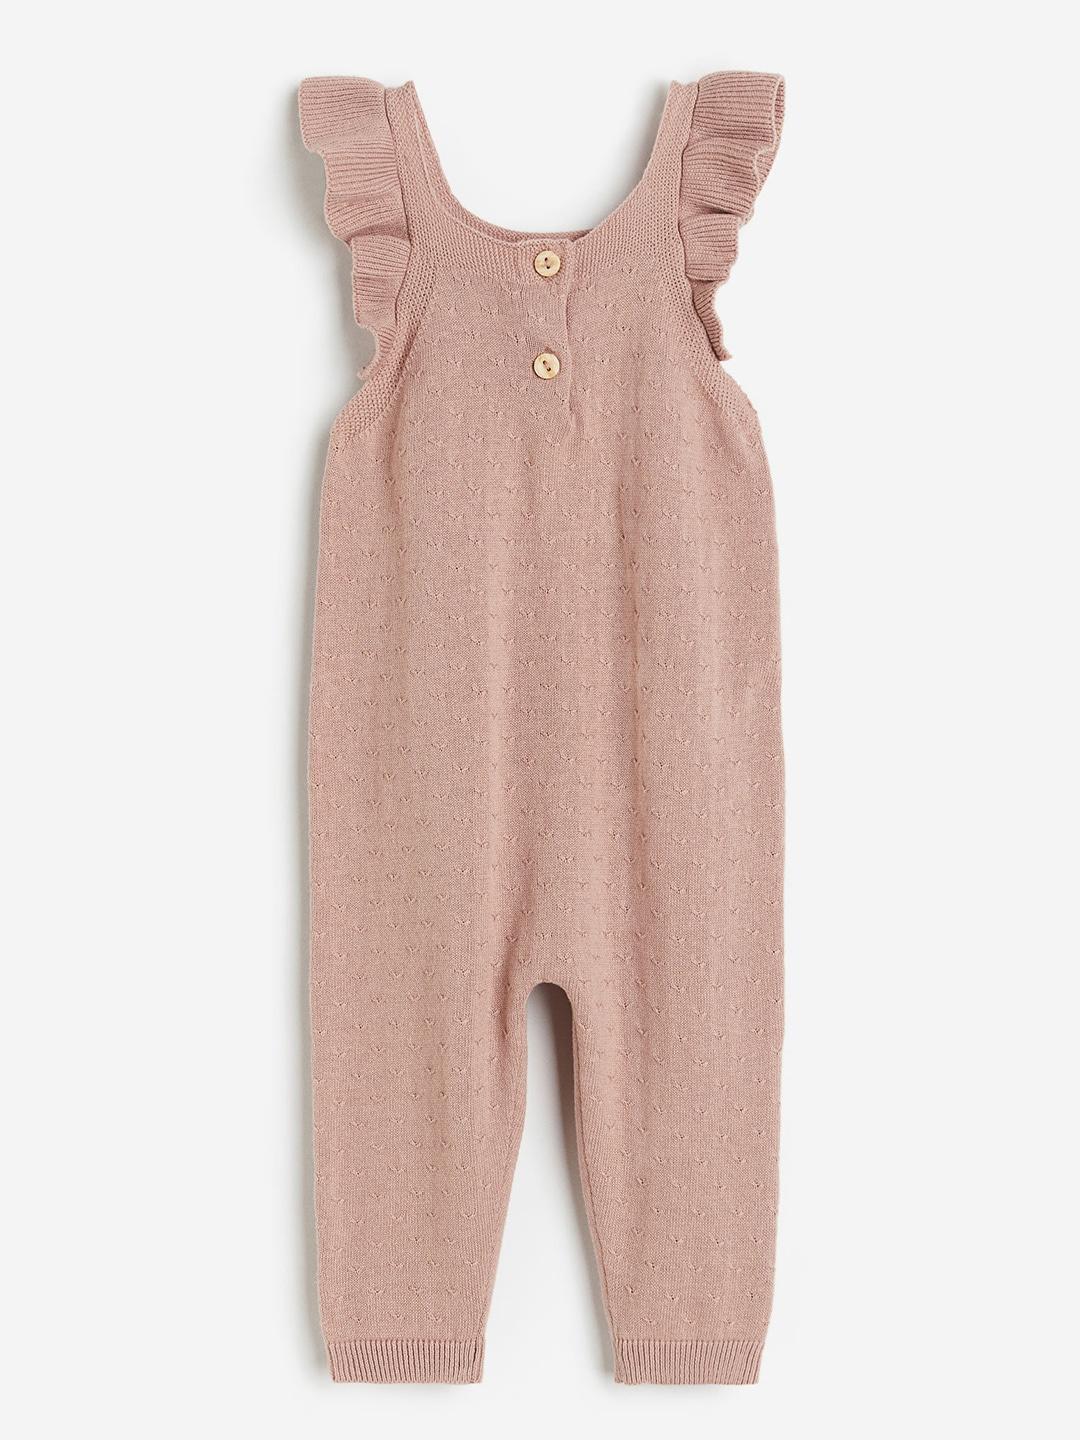 h&m-girls-pure-cotton-knitted-romper-suit